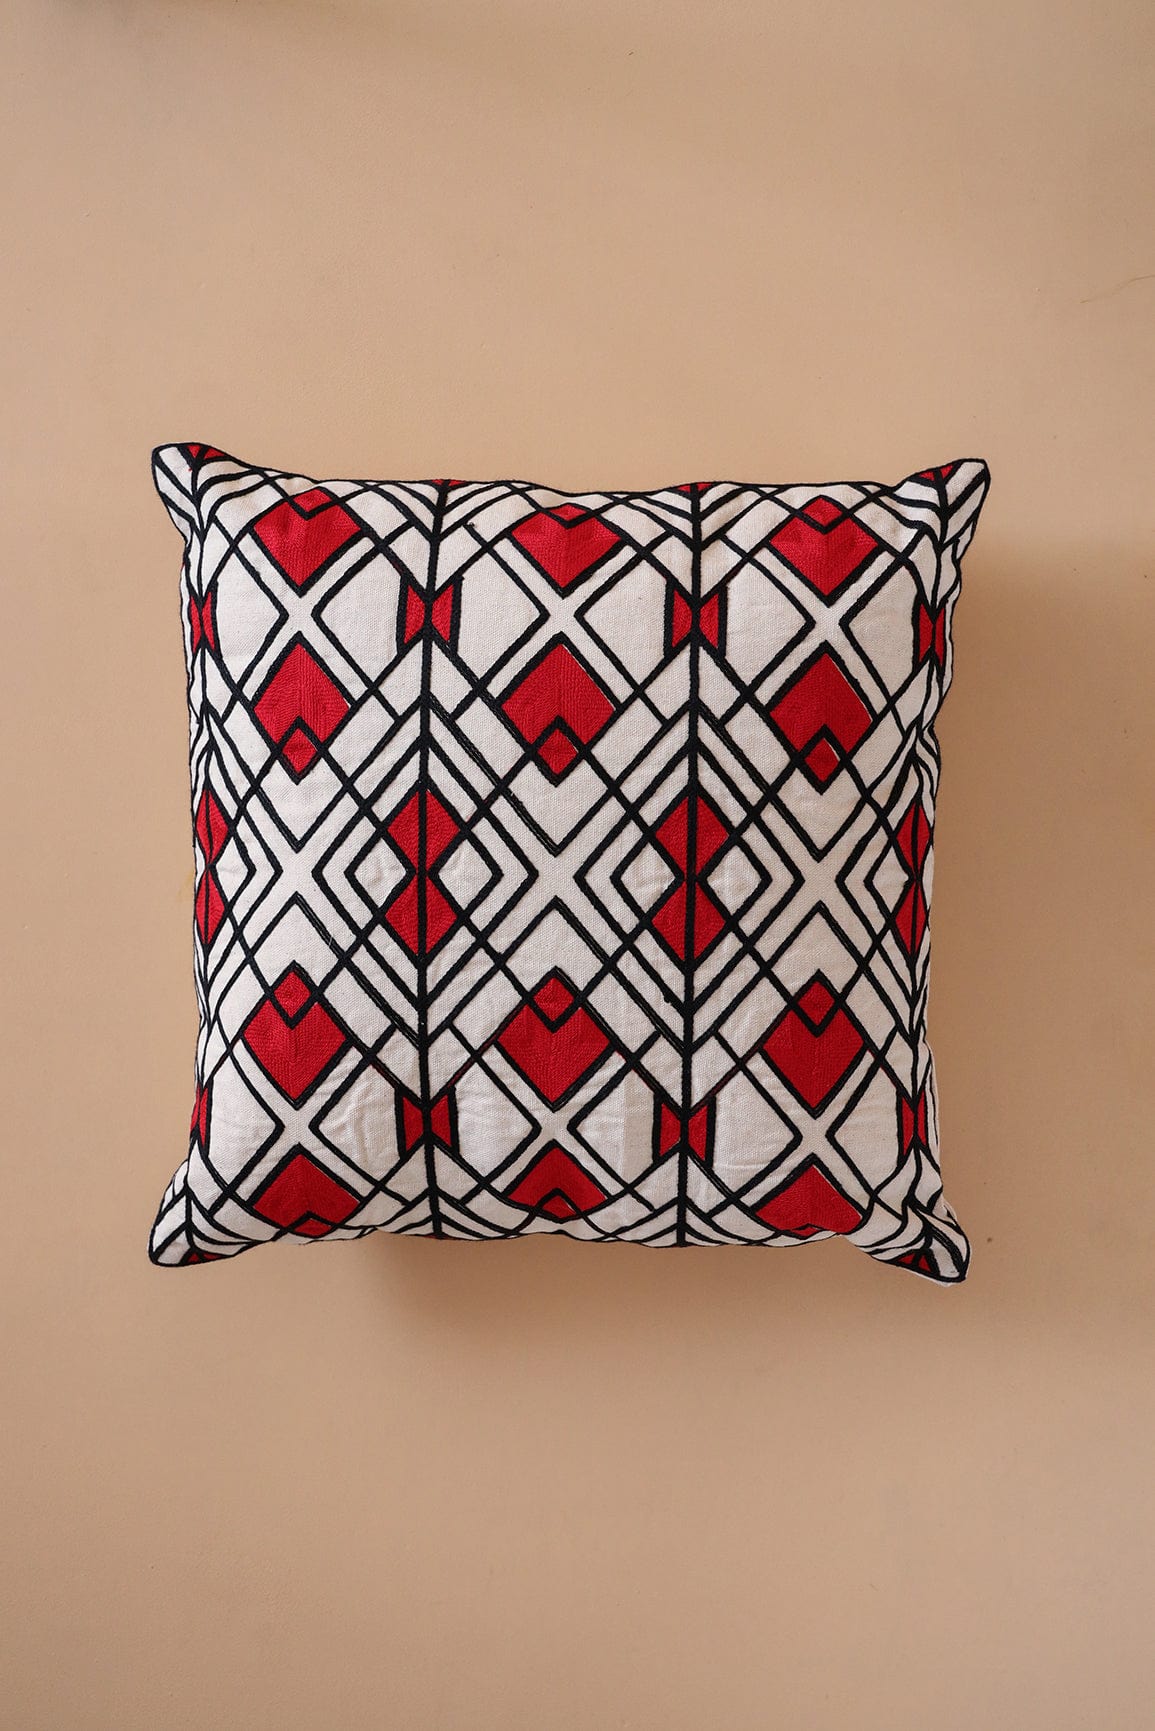 doeraa Red and Black Pattern Embroidery on off white cotton Cushion Cover (16*16 inches)